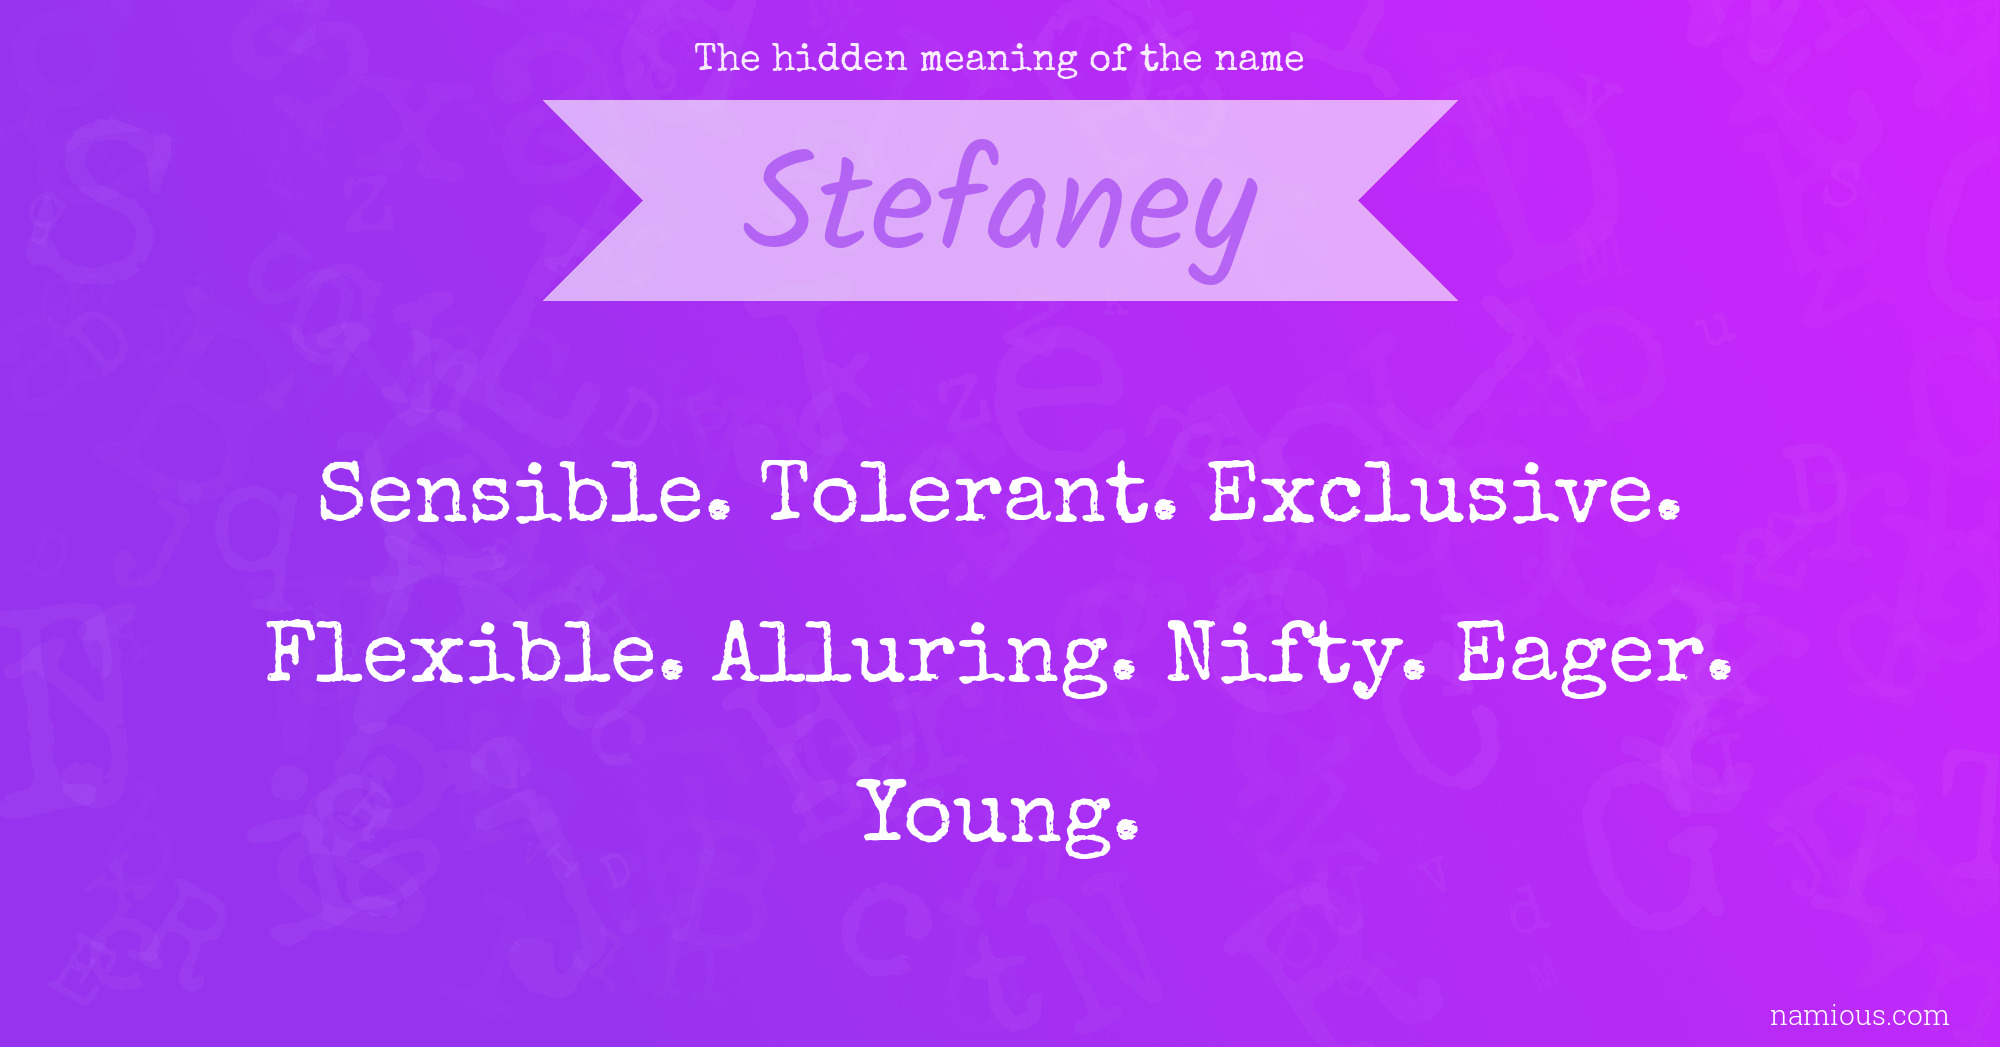 The hidden meaning of the name Stefaney